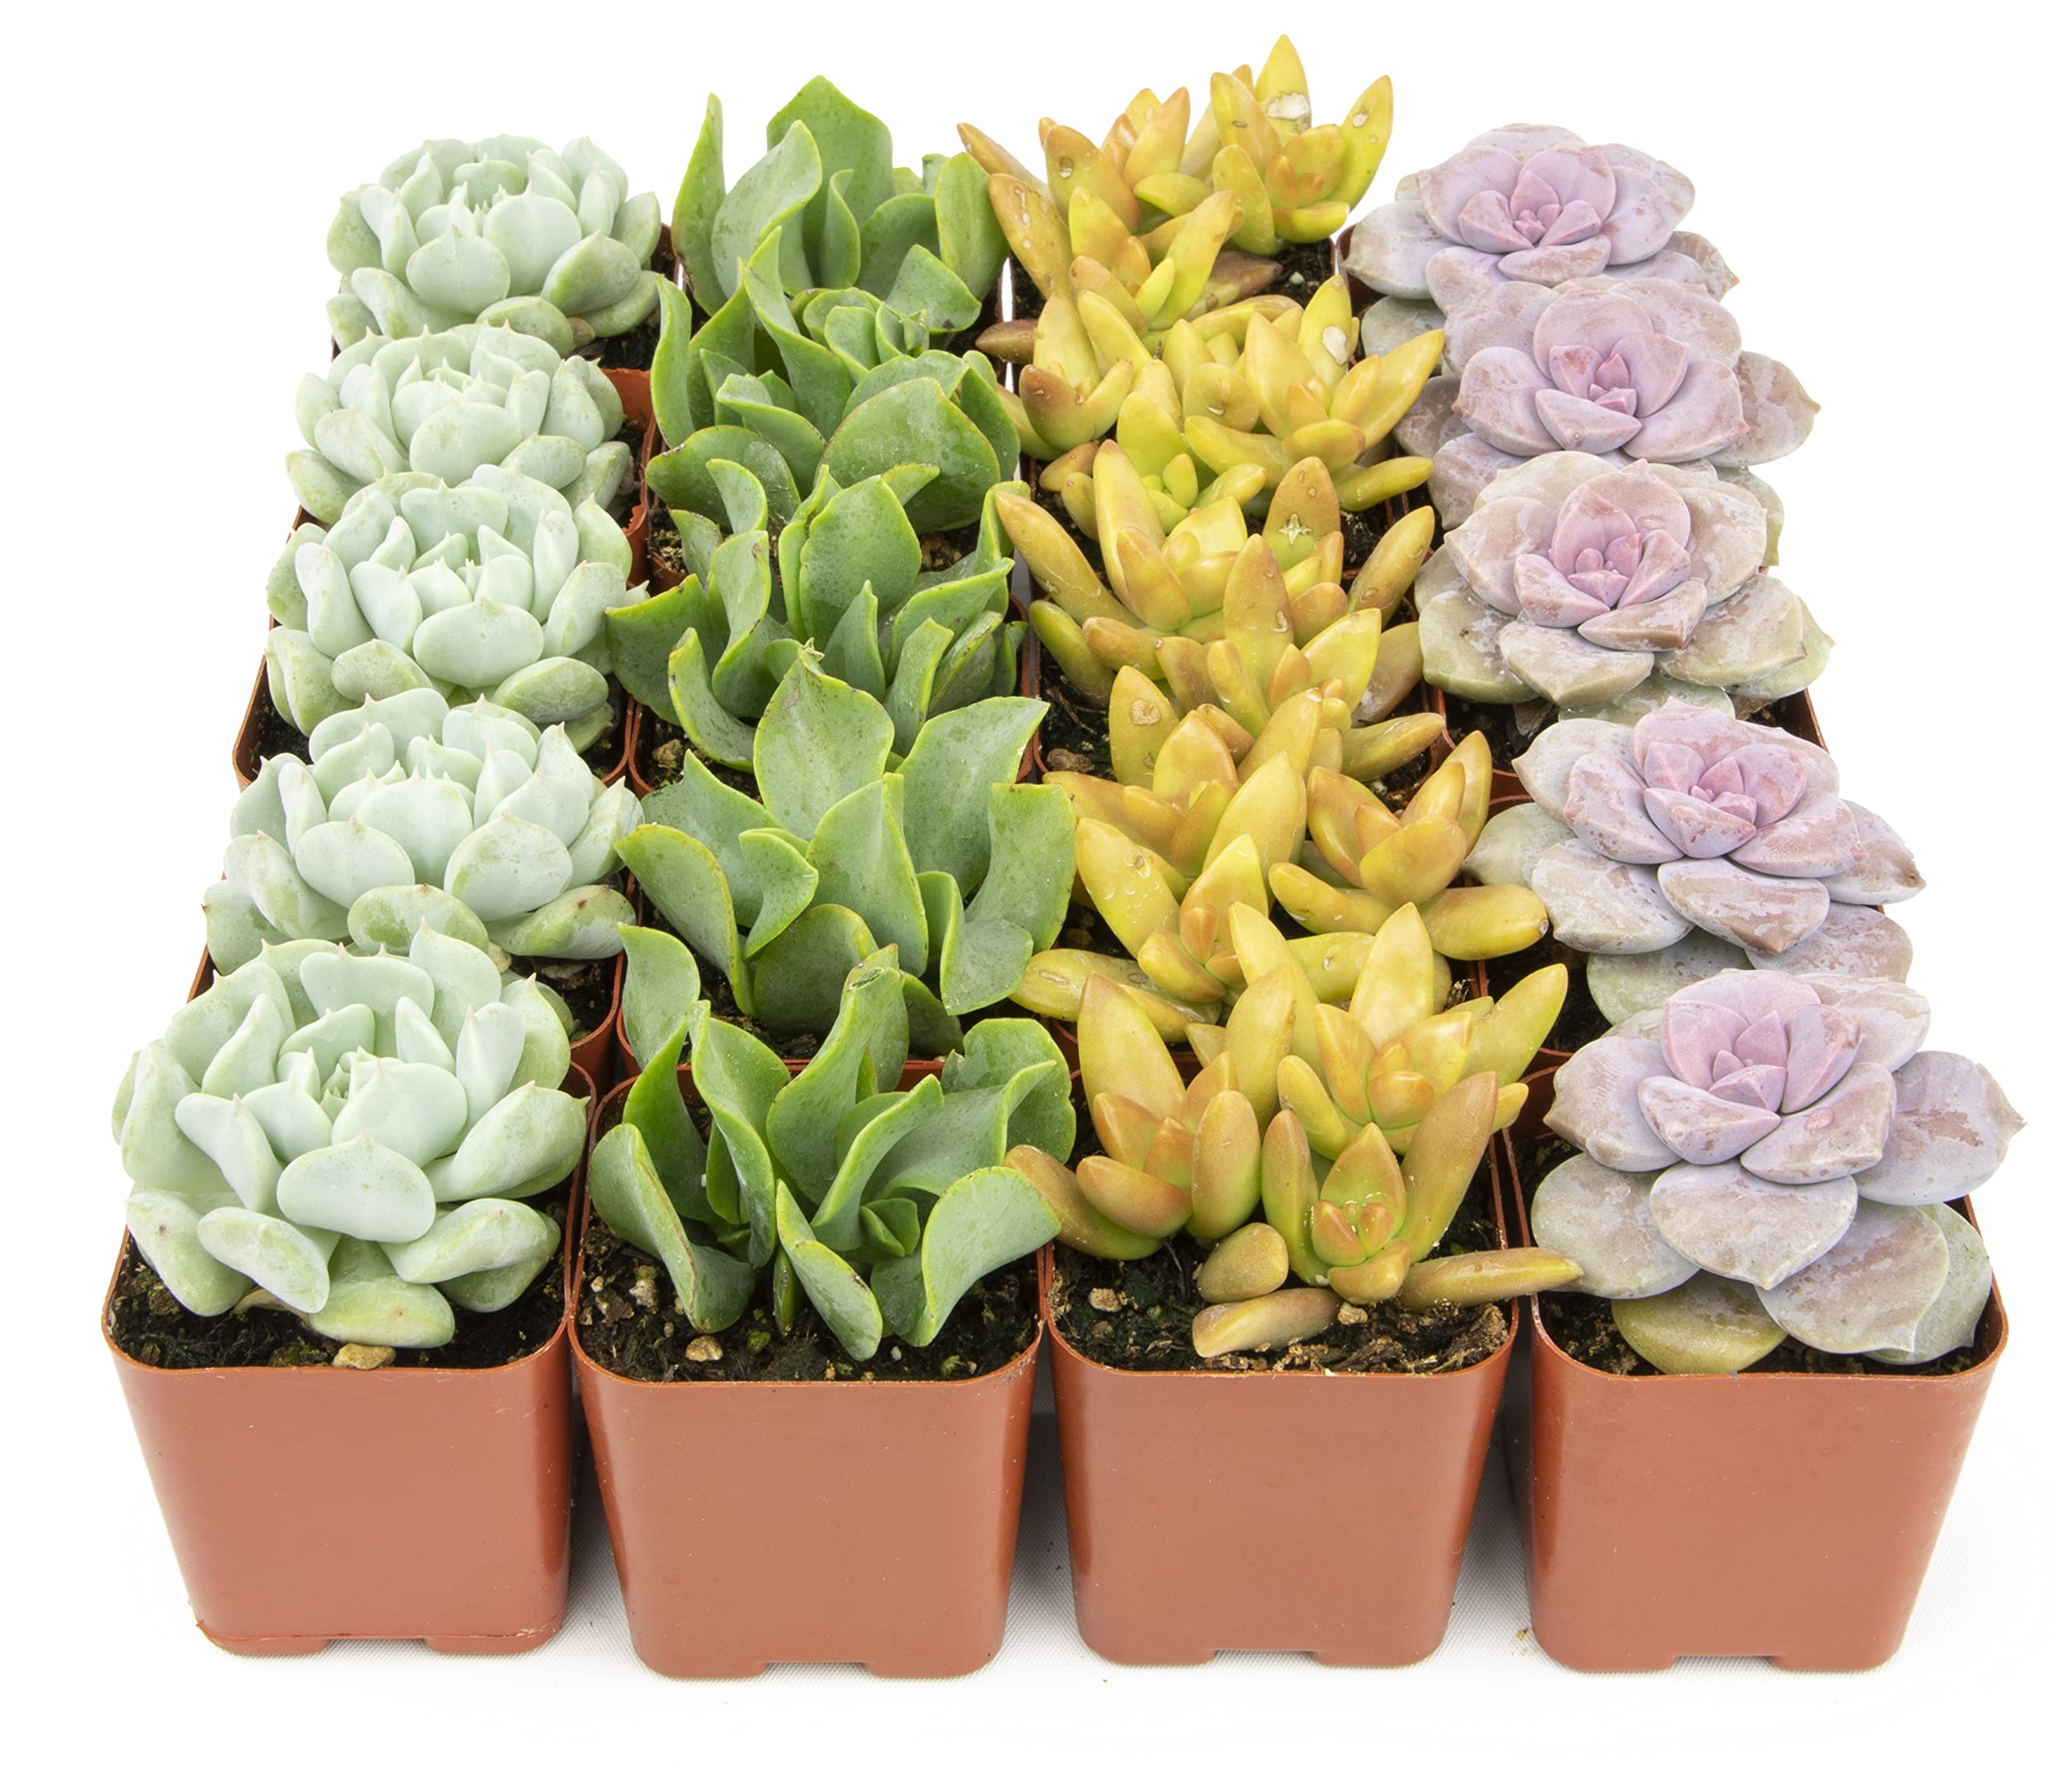 20-Pack Potted Live Succulent Indoor House Plants $26.51 + Free Shipping w/ Prime